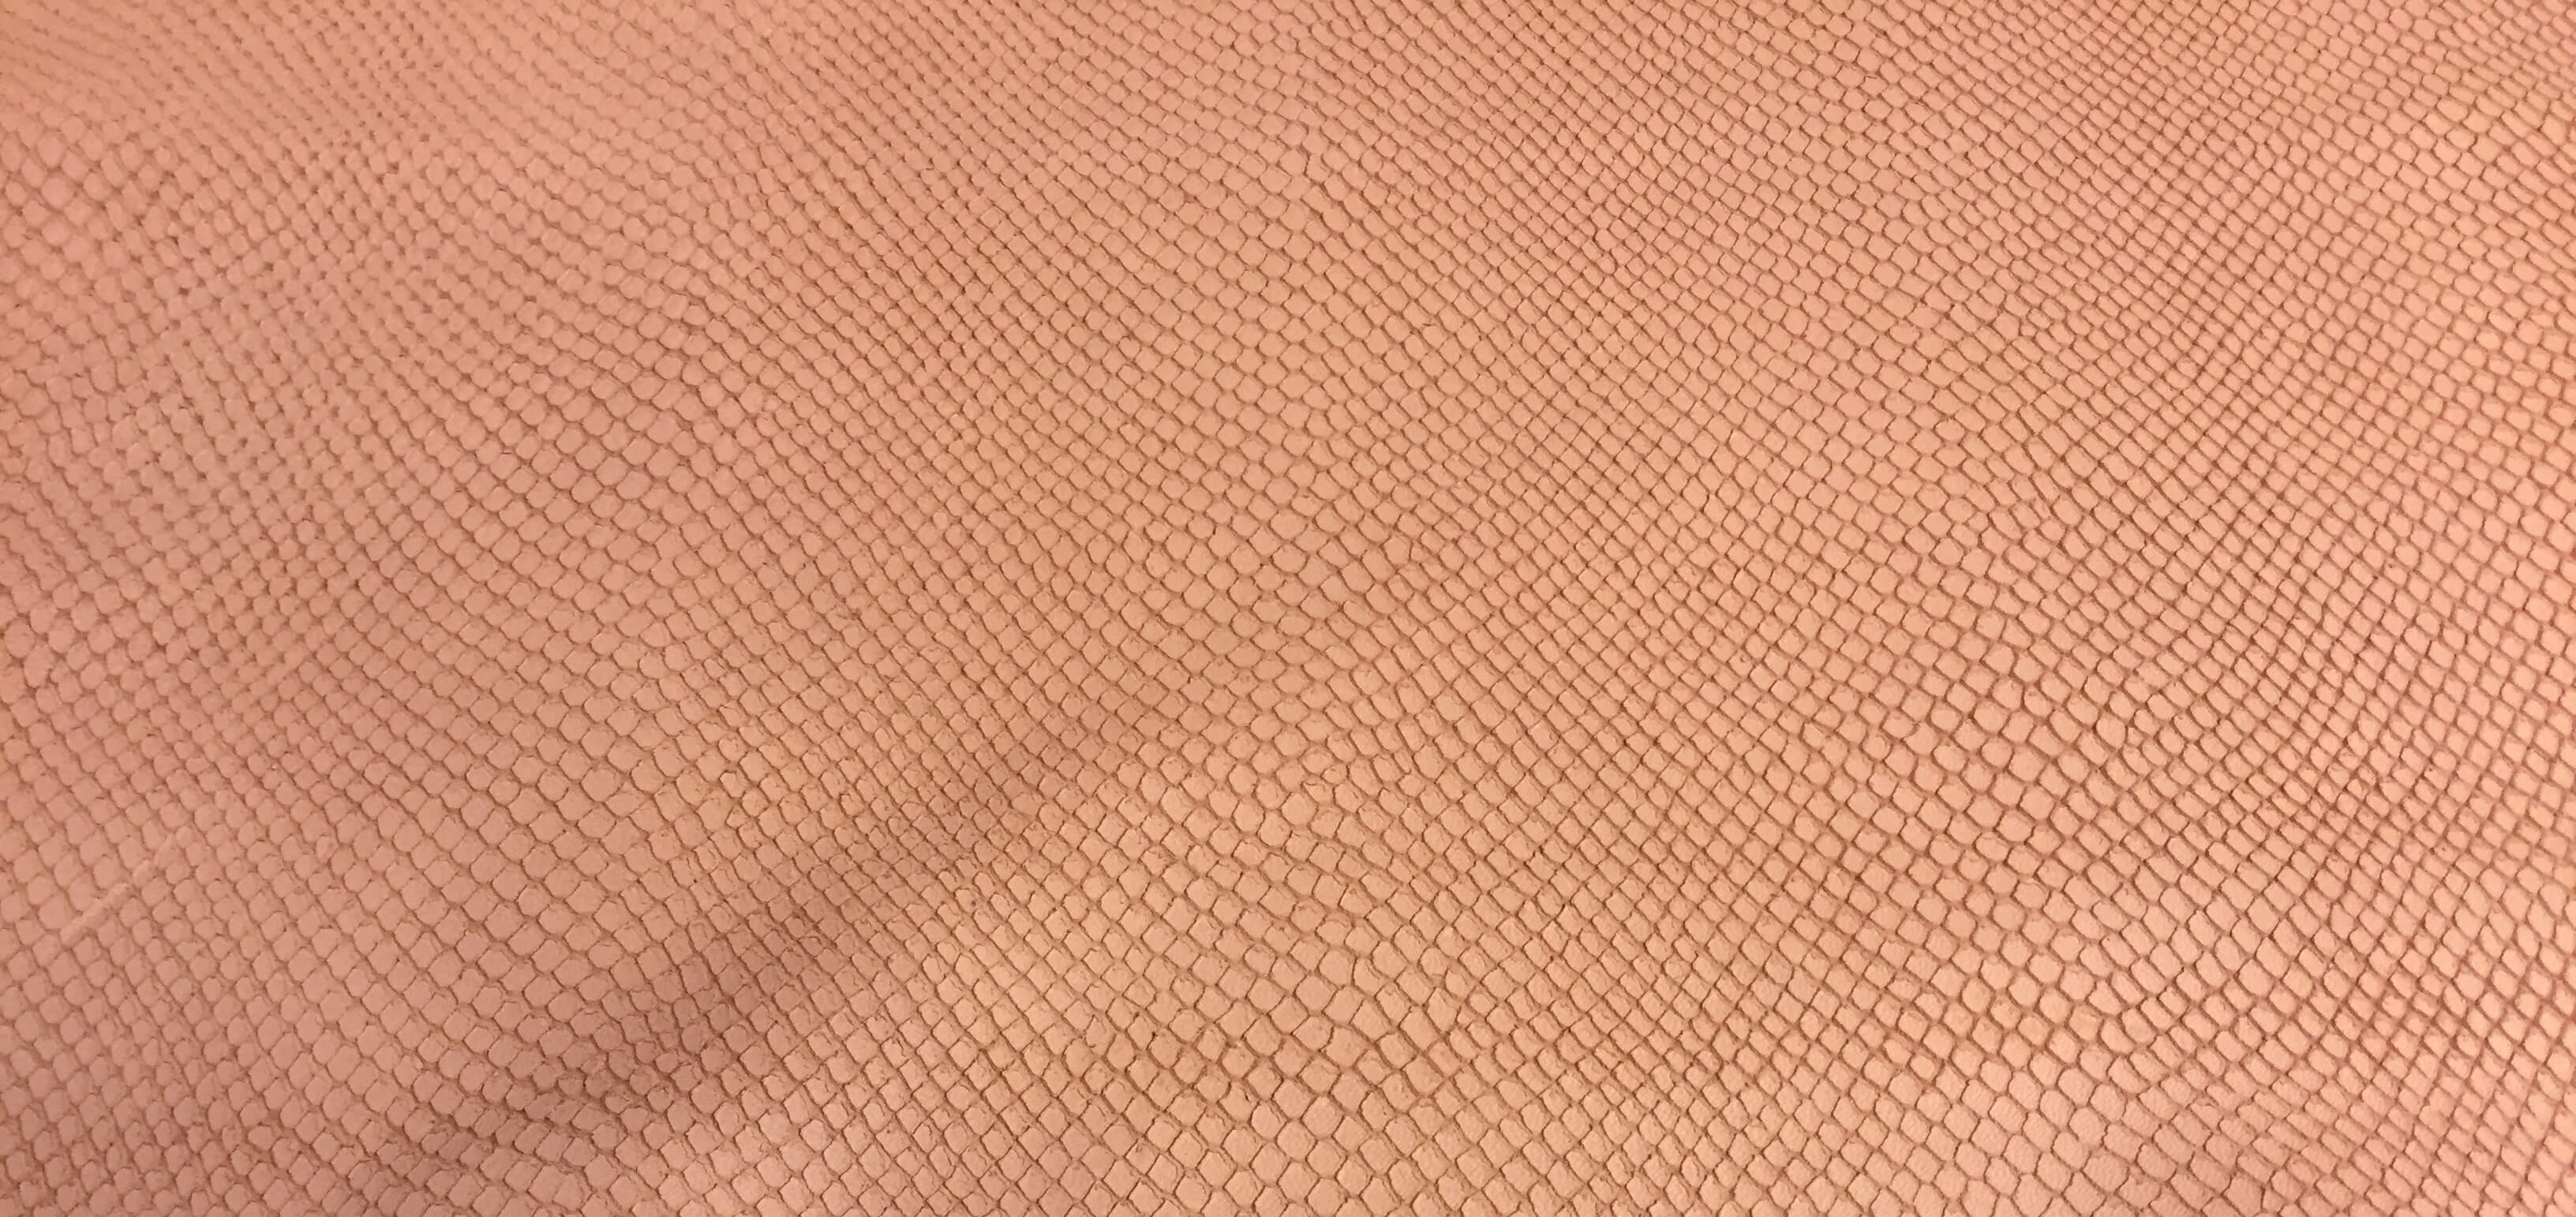 Pink Embossed Reptile Skin Leather Hides